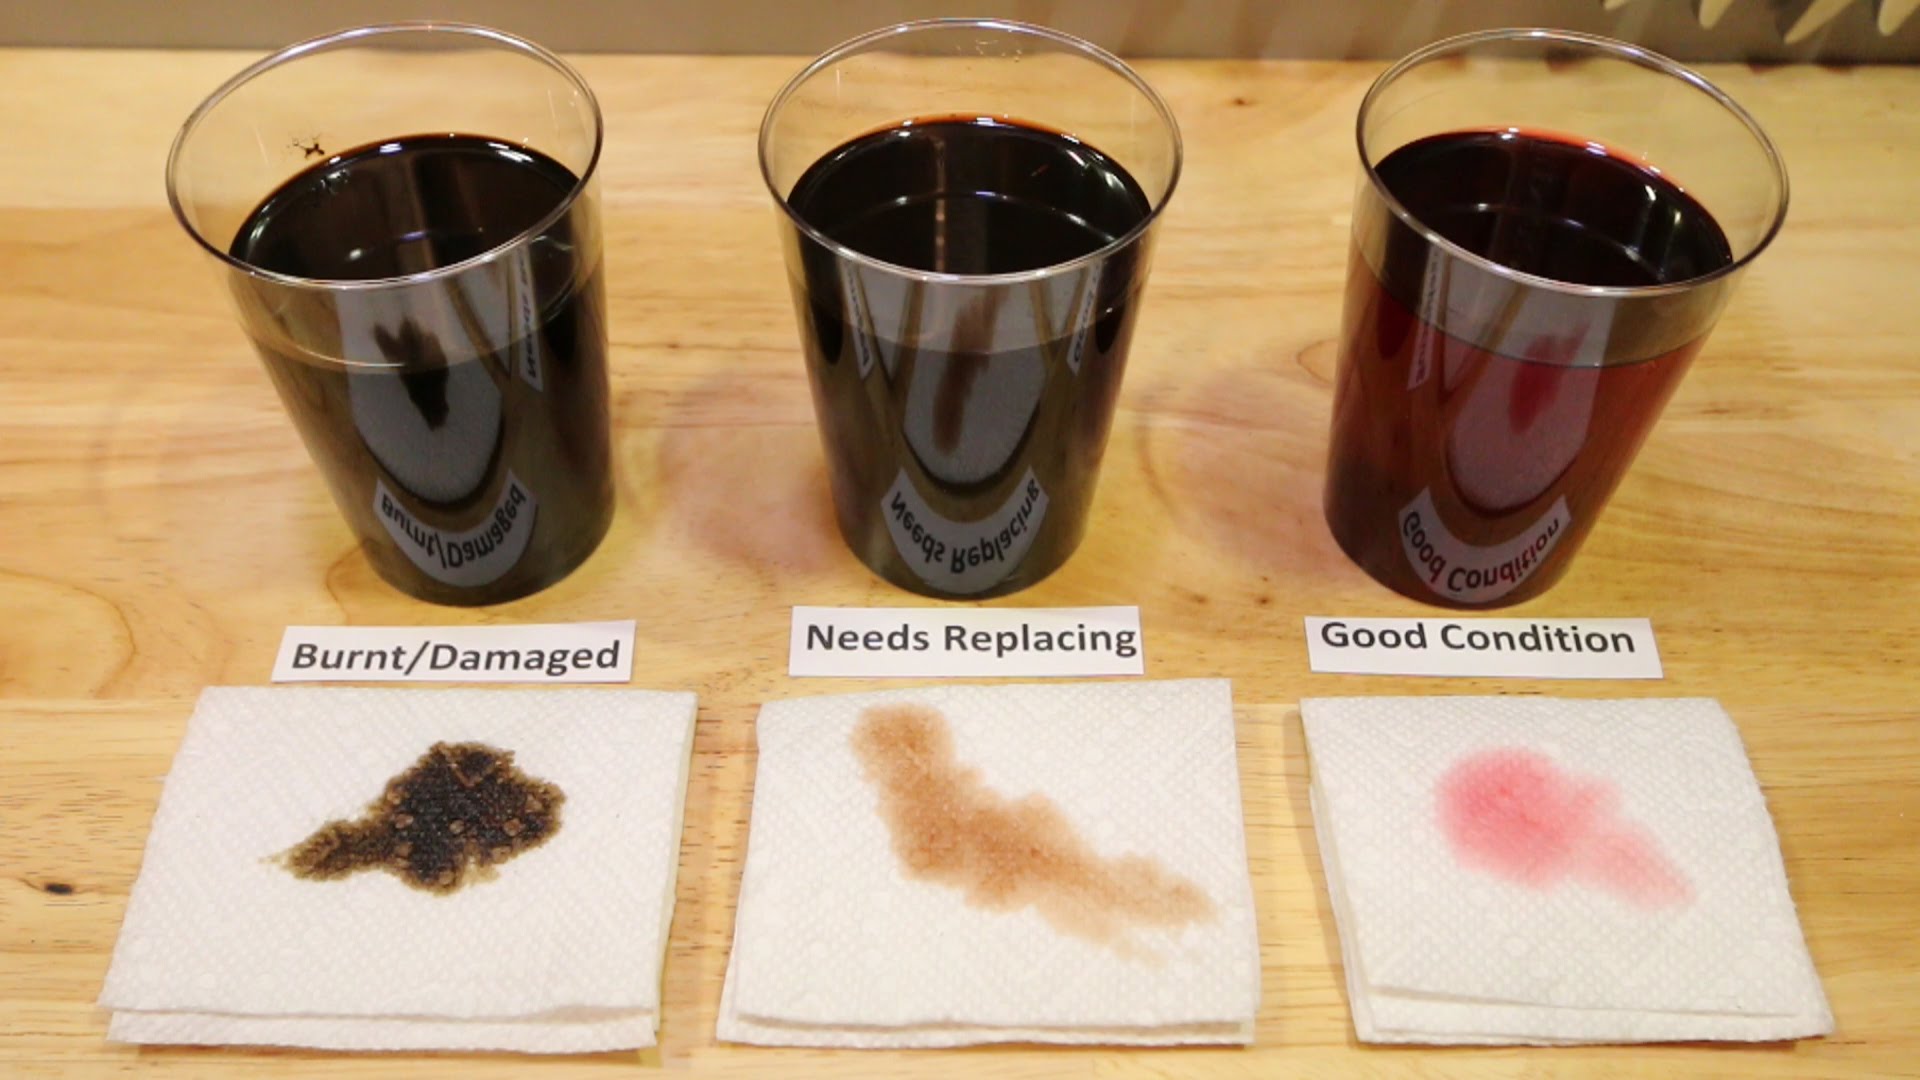 Three different states of transmission fluid being shown, one in good condition, one needing replacement, and the other being burnt and damaged.